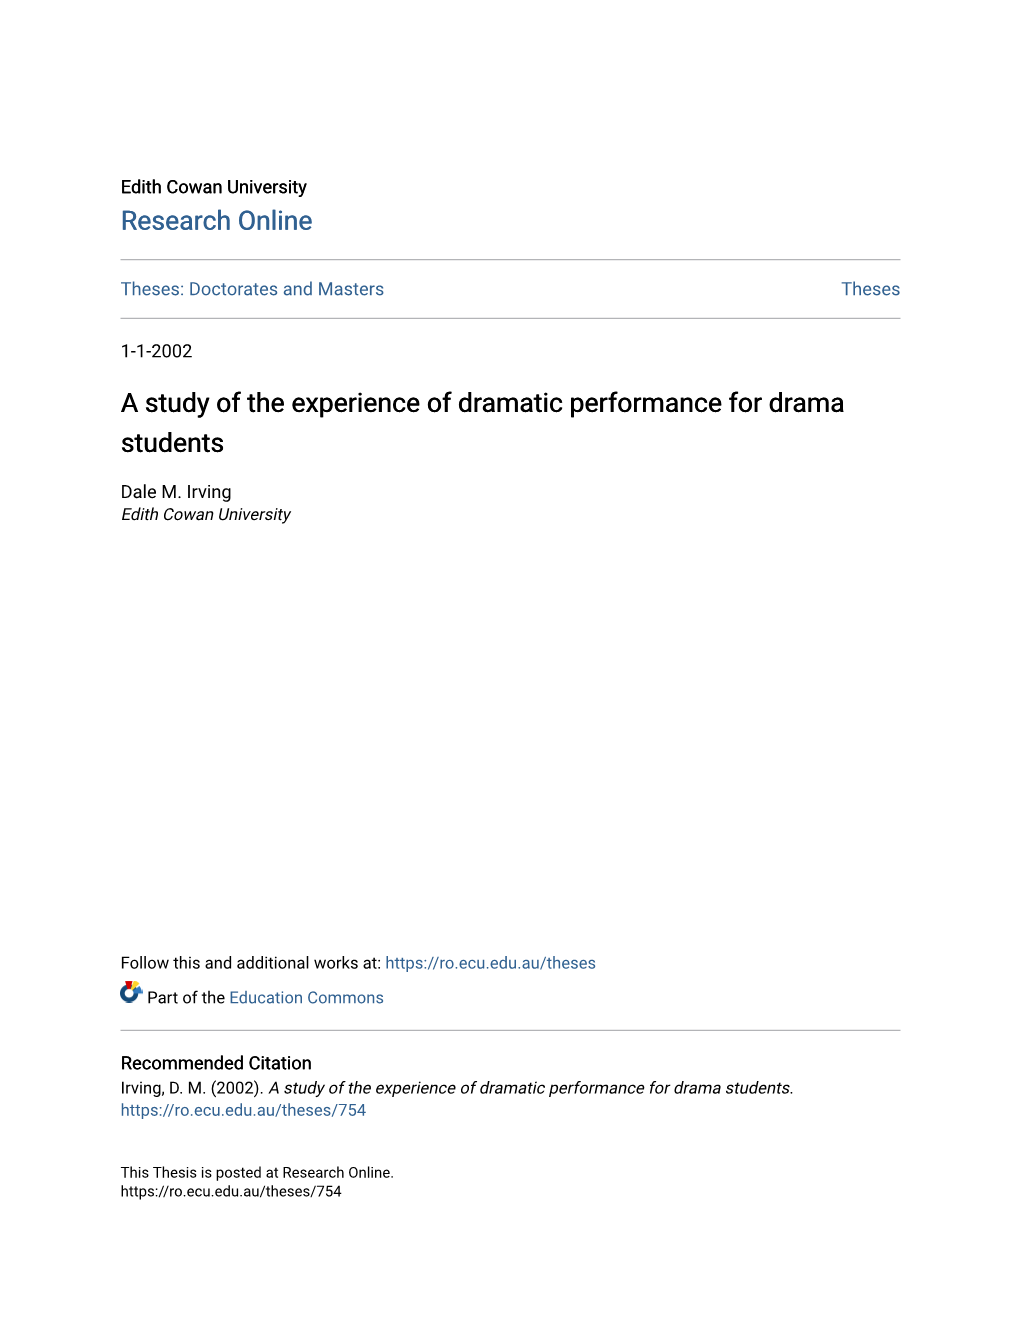 A Study of the Experience of Dramatic Performance for Drama Students